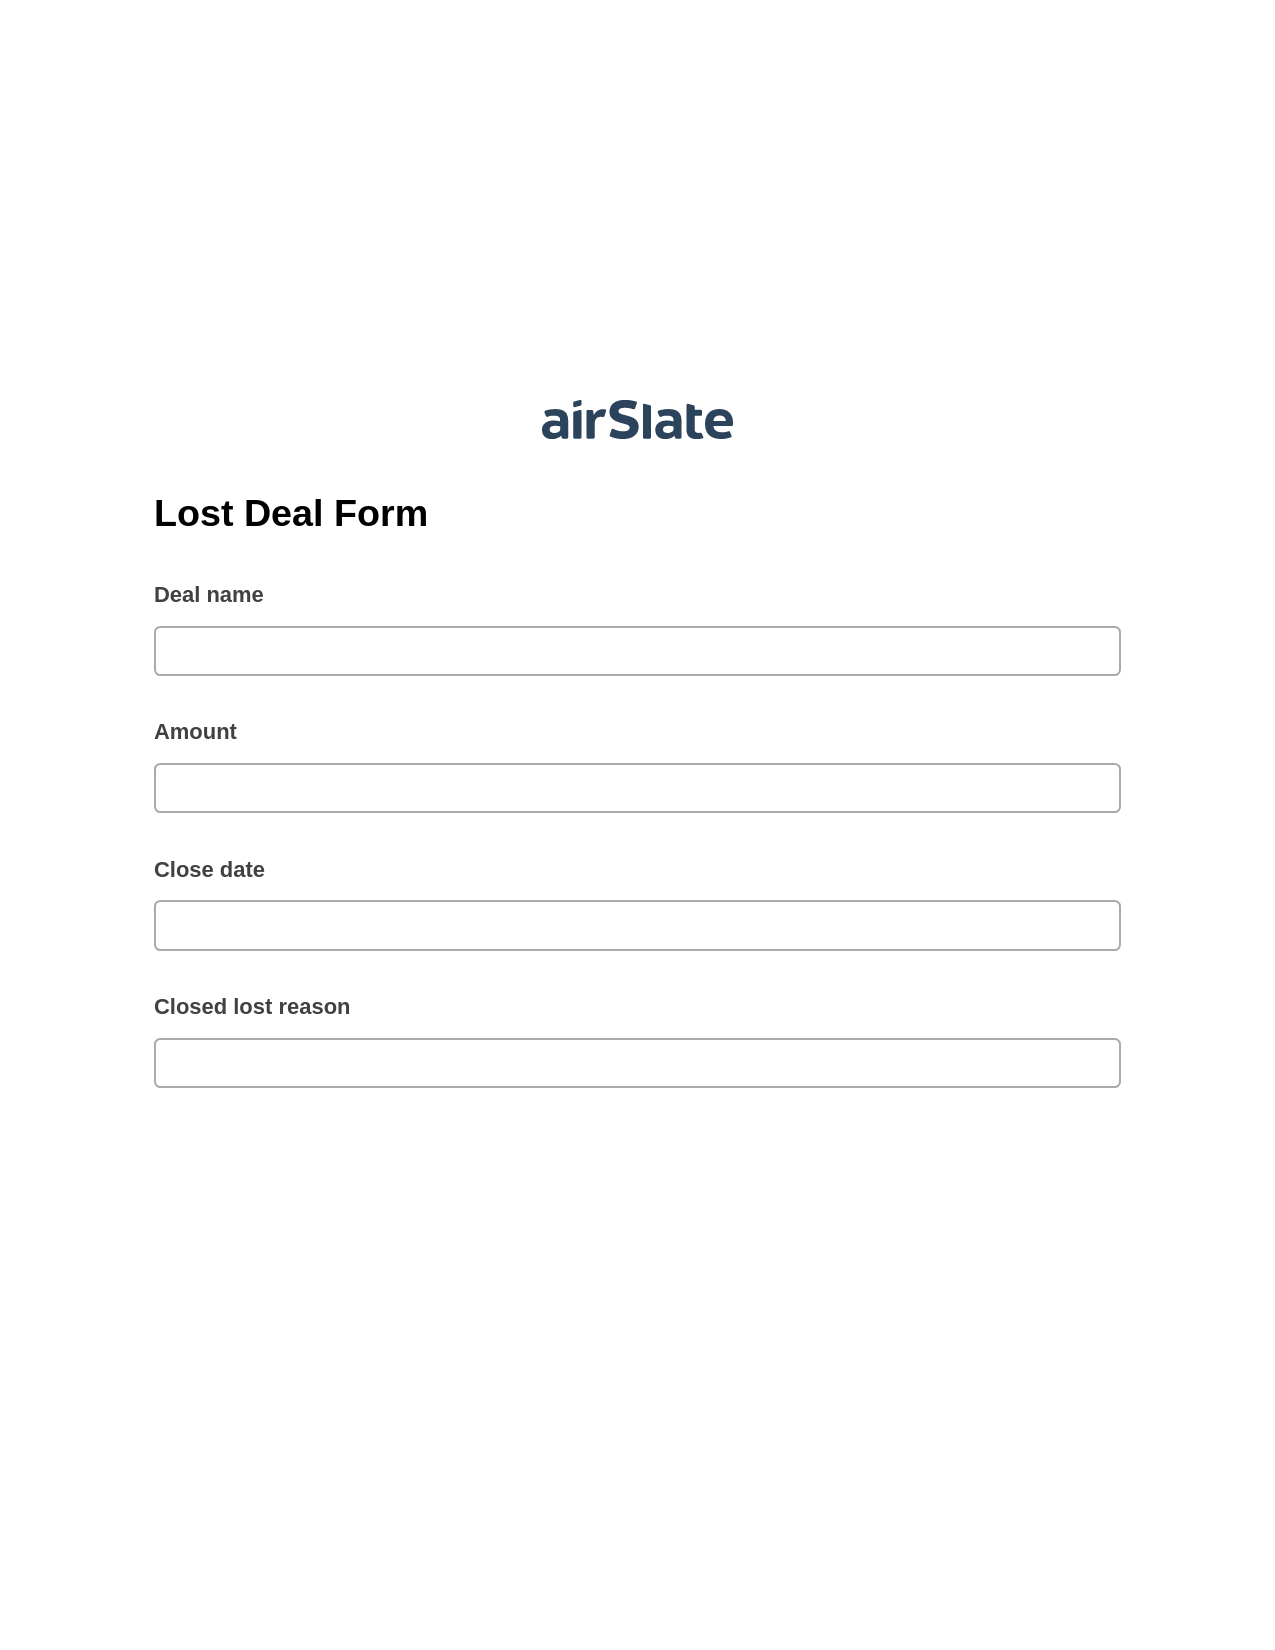 Lost Deal Form Pre-fill from MS Dynamics 365 Records, Add Tags to Slate Bot, Archive to Box Bot